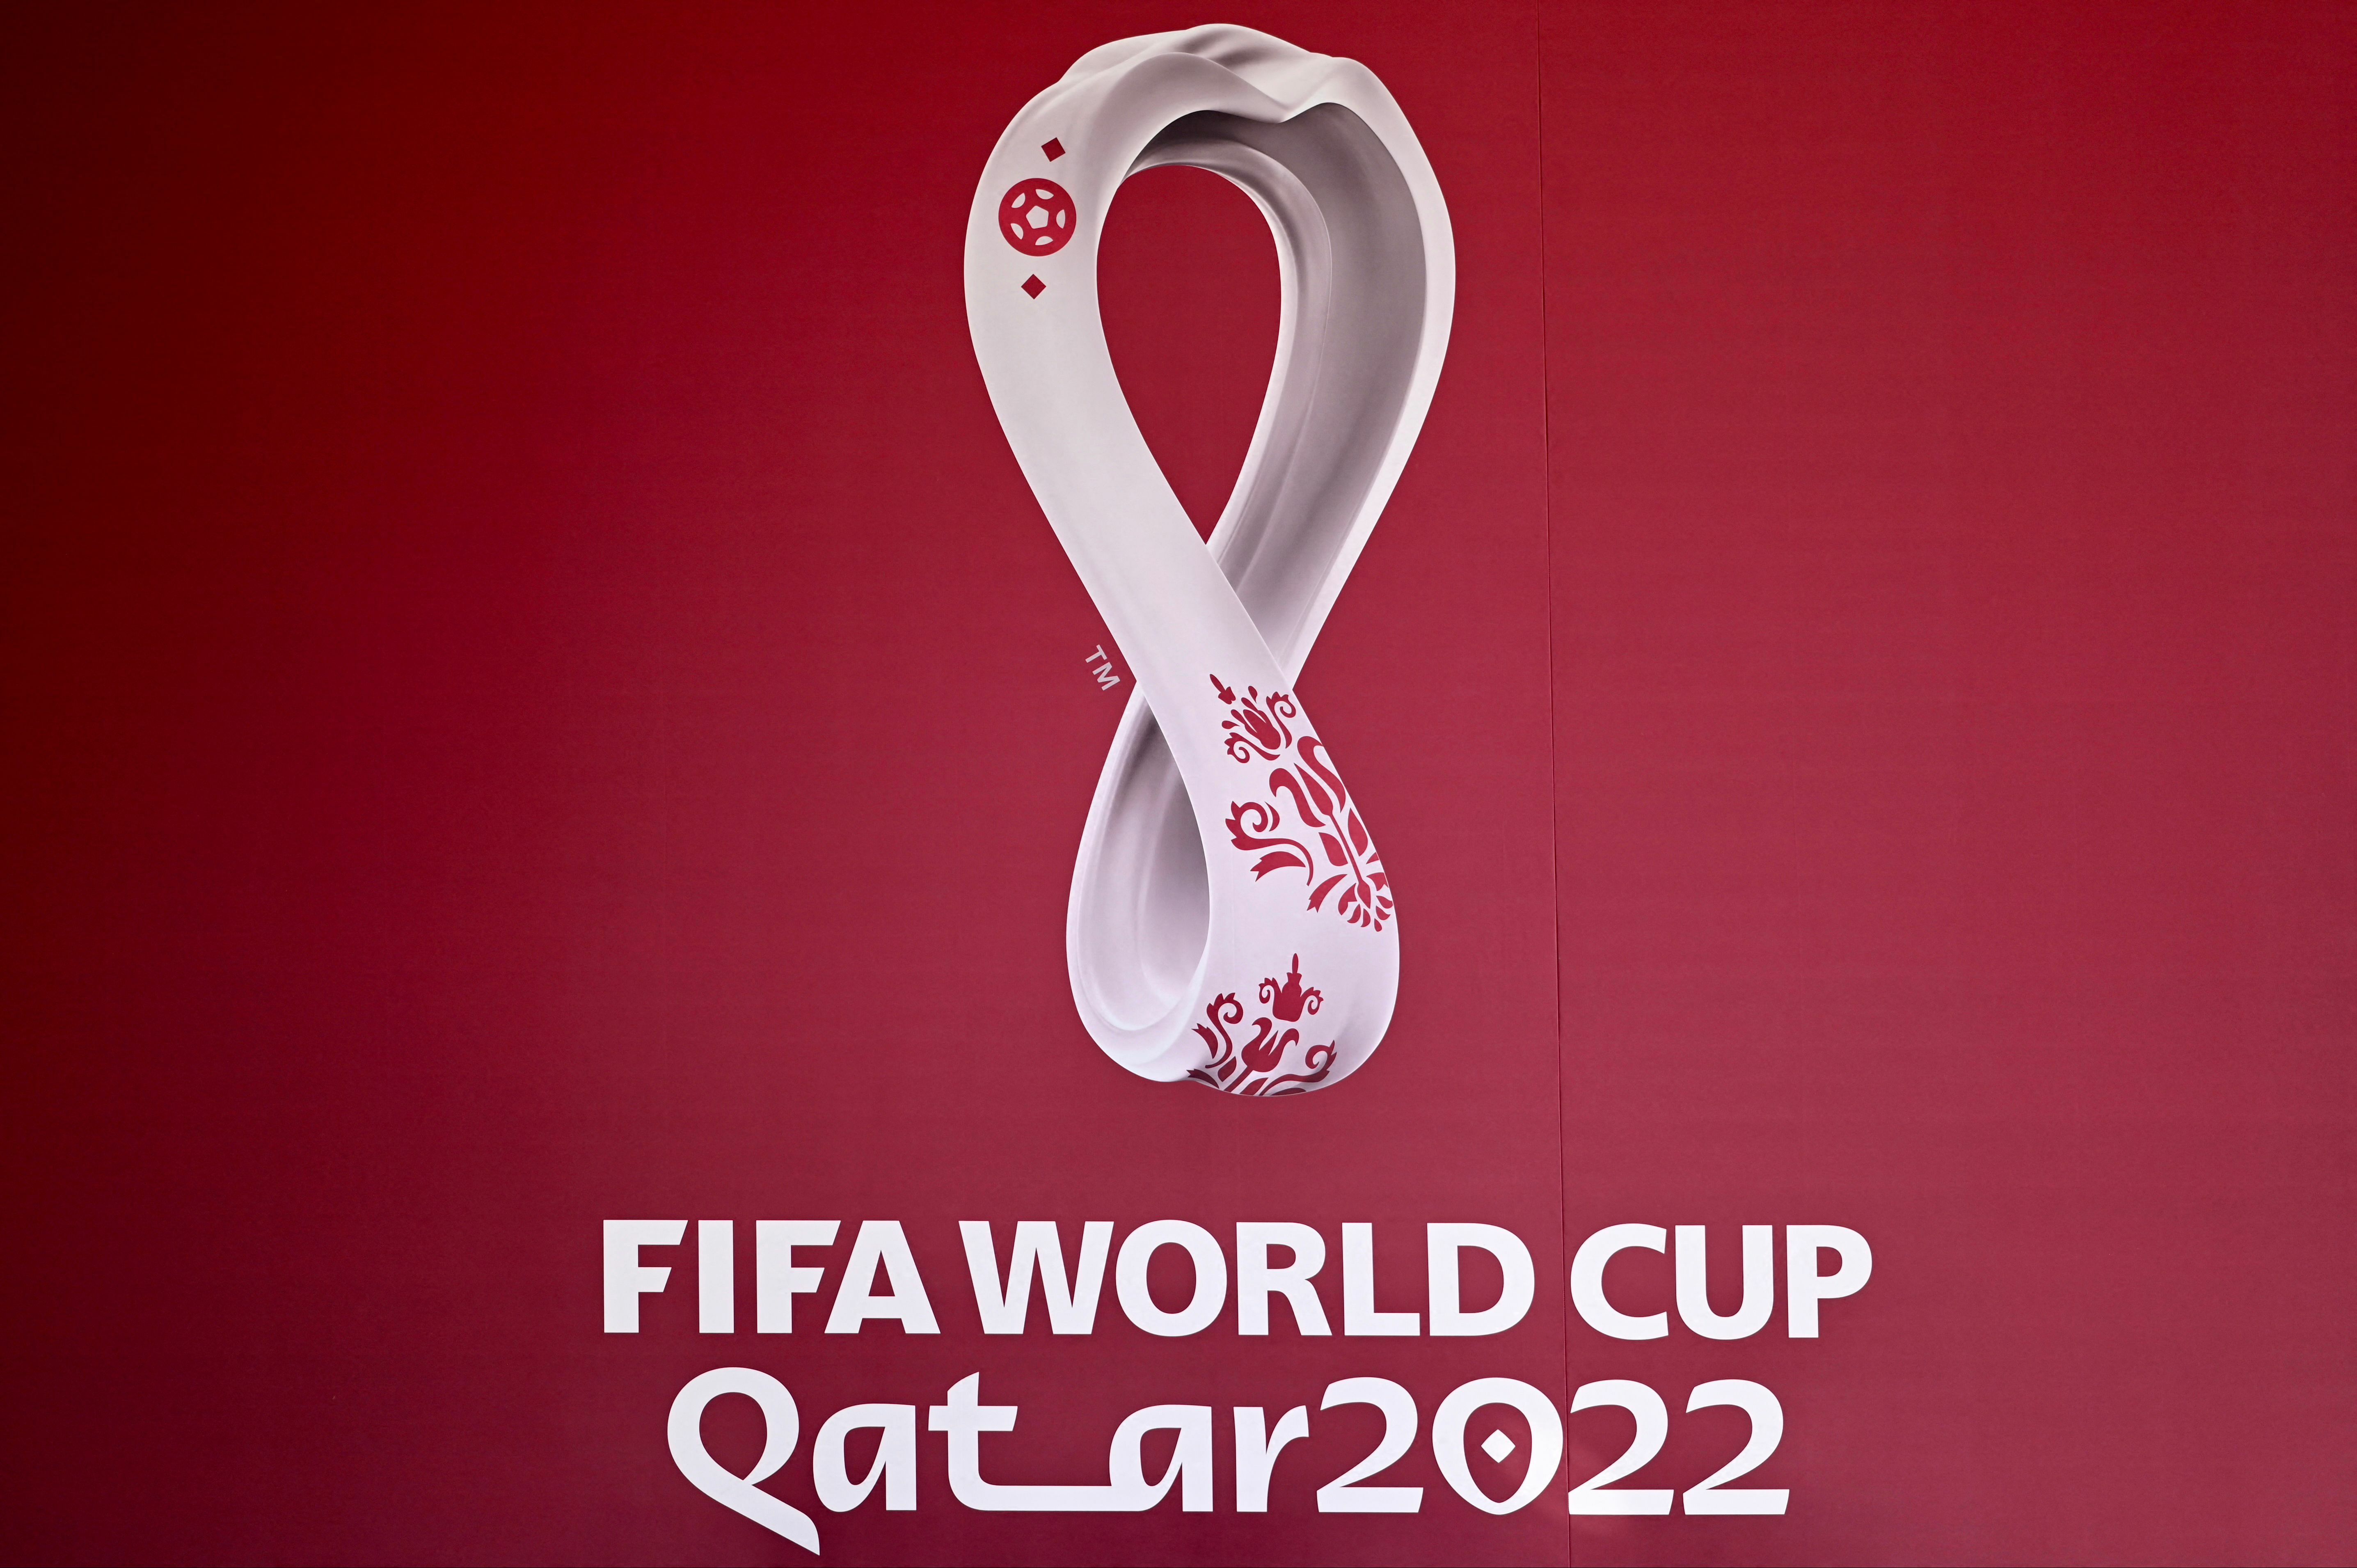 The 2022 World Cup logo.